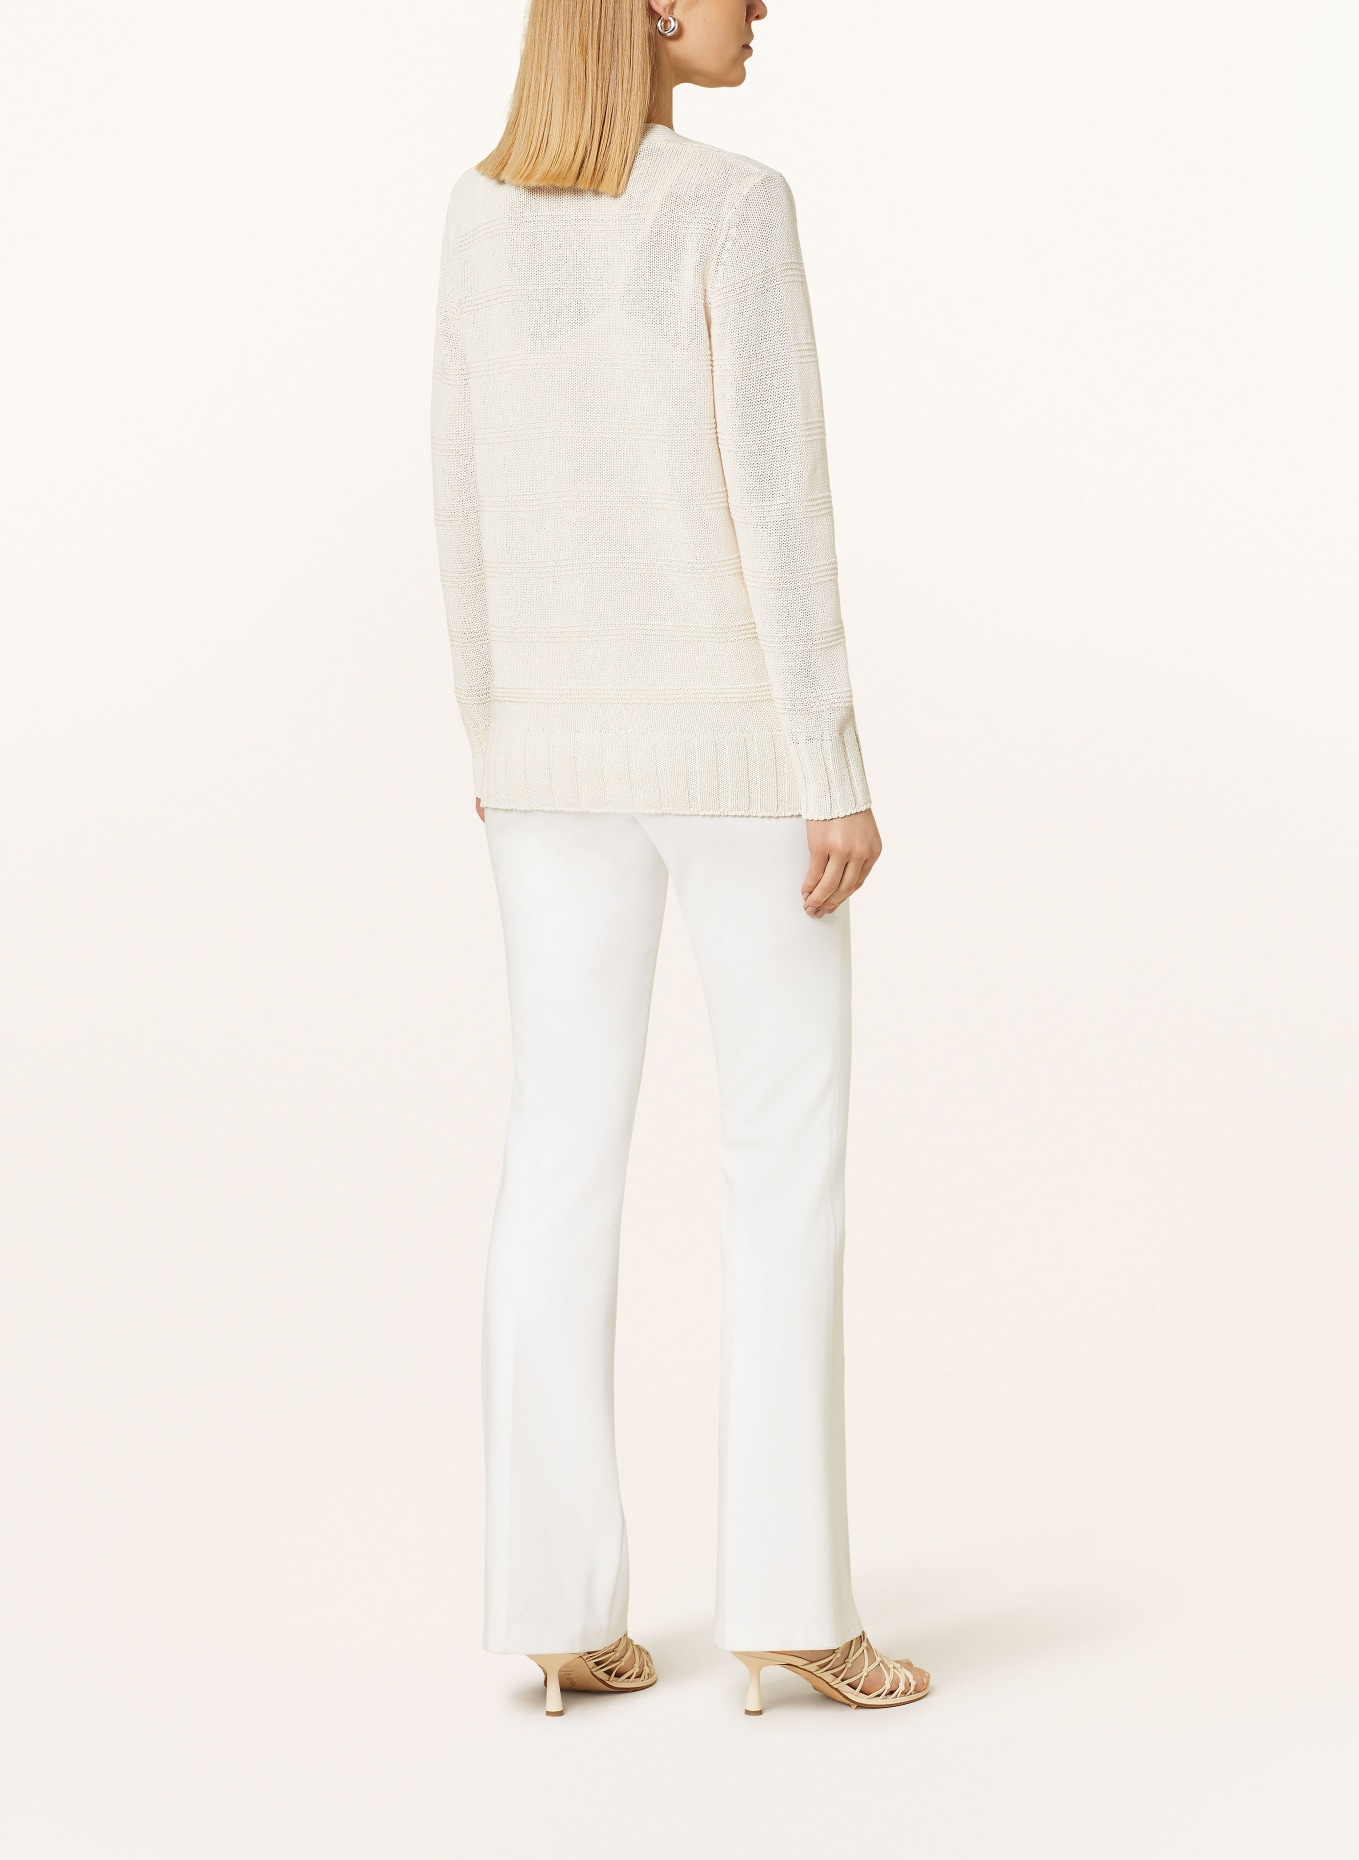 MAERZ MUENCHEN Knit cardigan, Color: CREAM (Image 3)